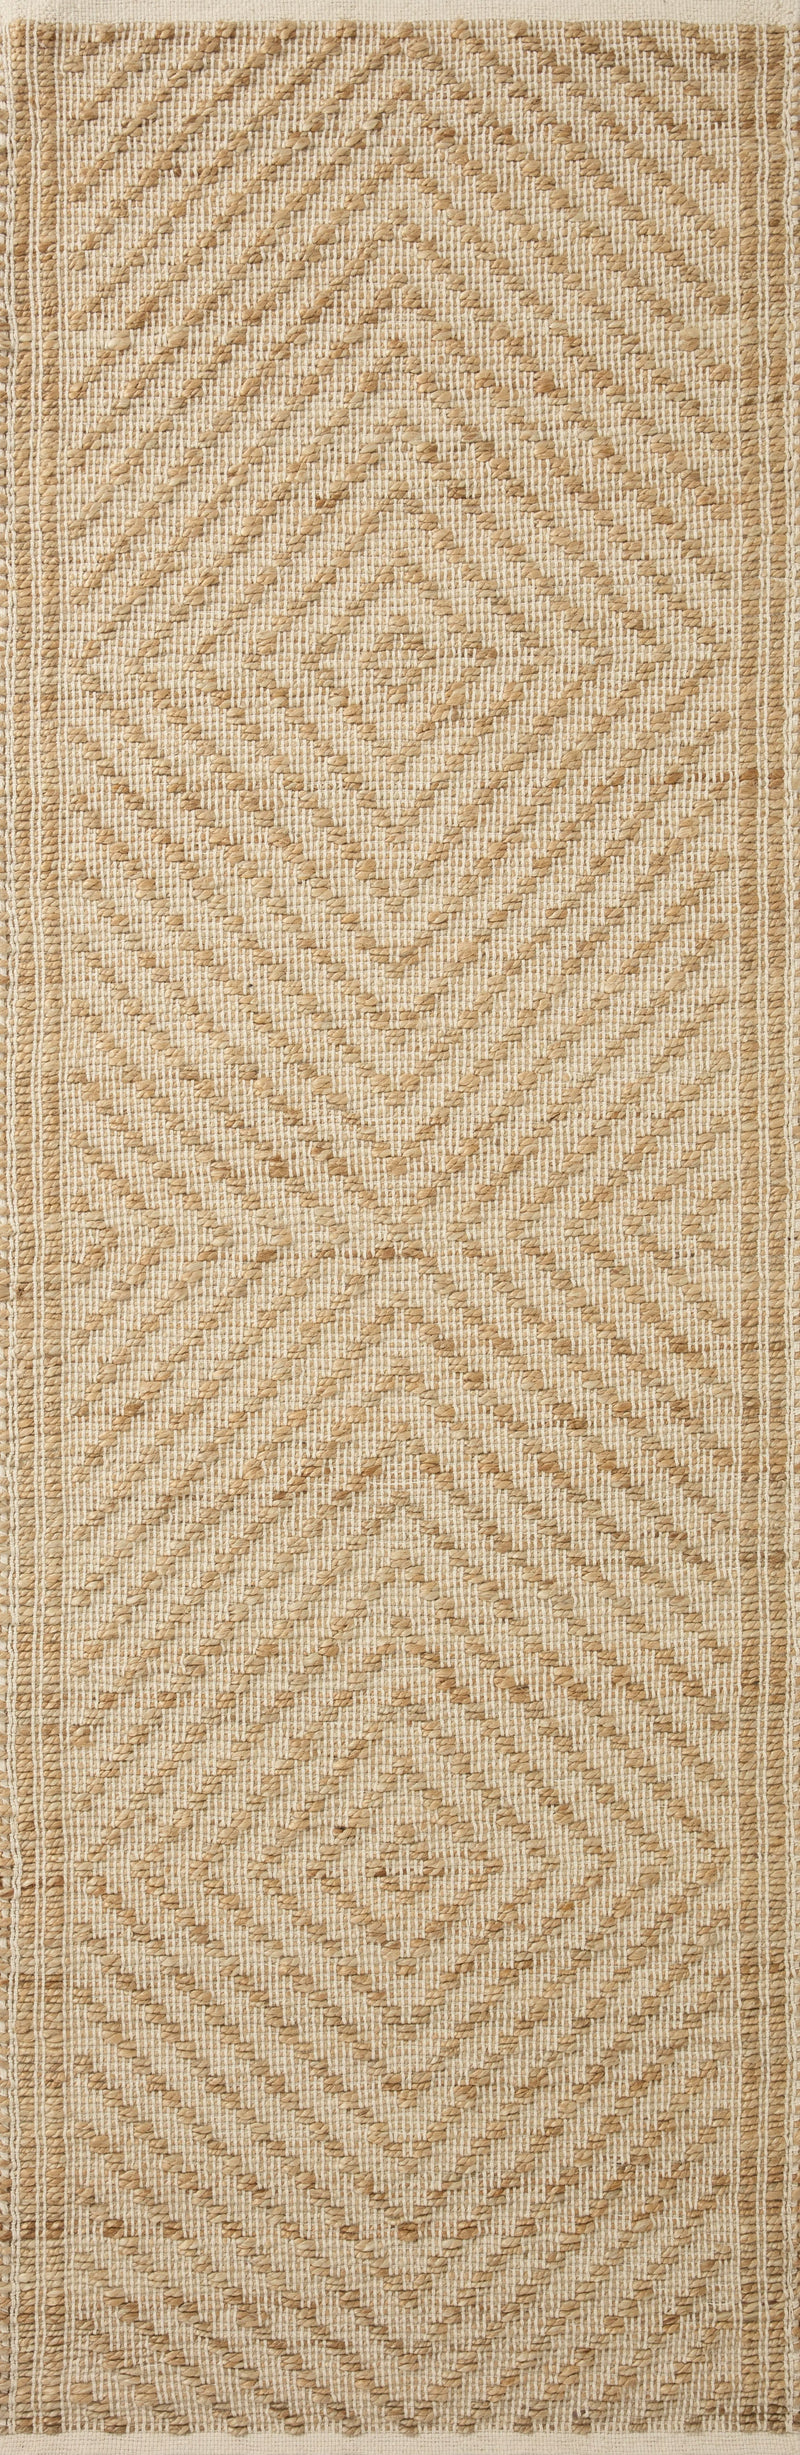 media image for colton hand woven natural ivory rug by angela rose x loloi colocon 04naiv2030 2 295